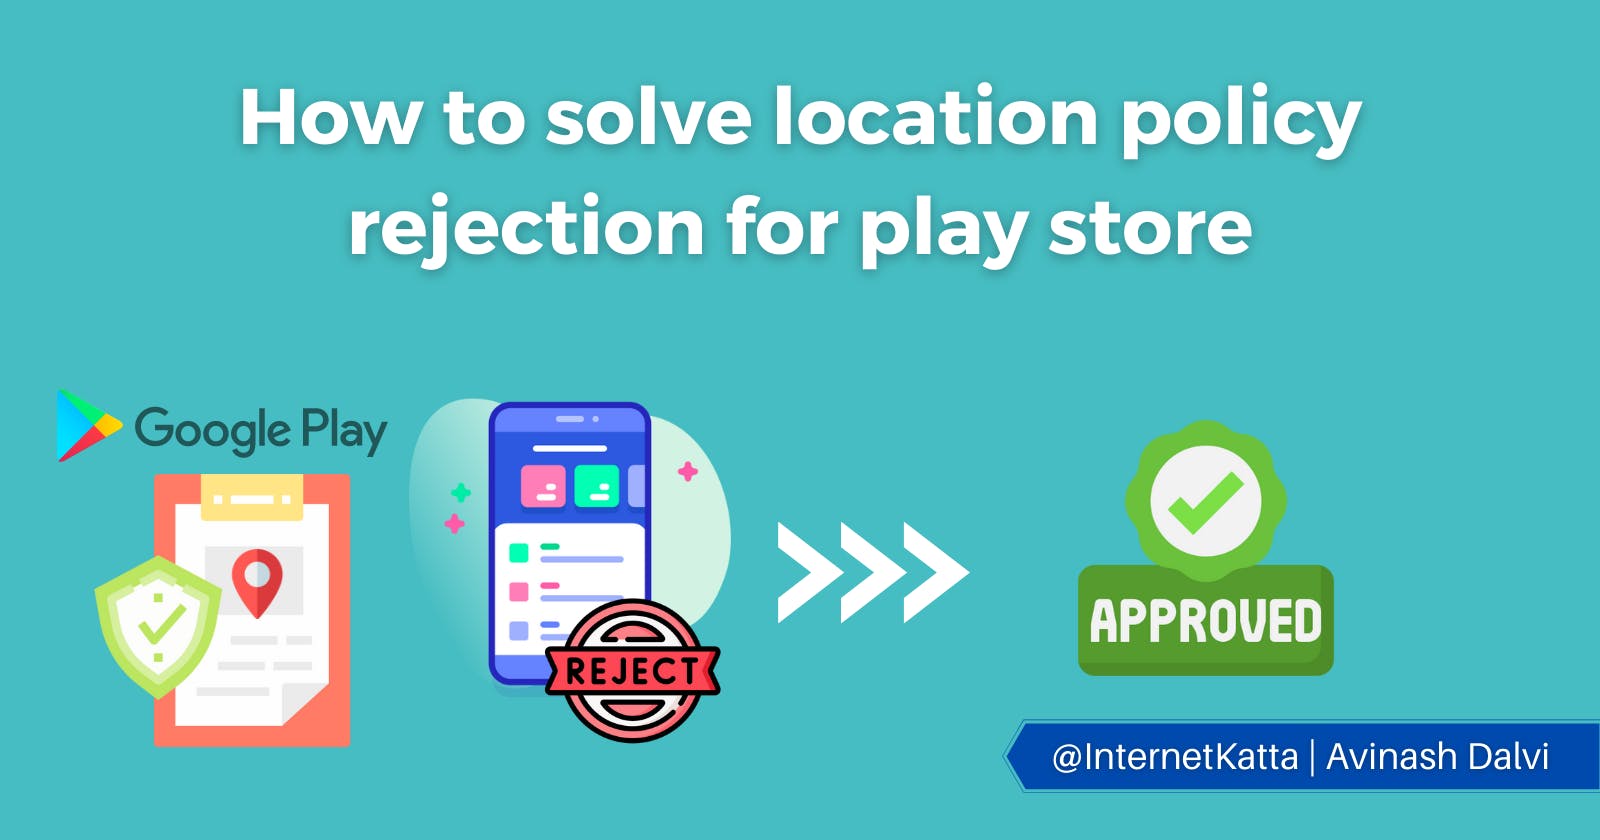 How to solve location policy rejection for play store